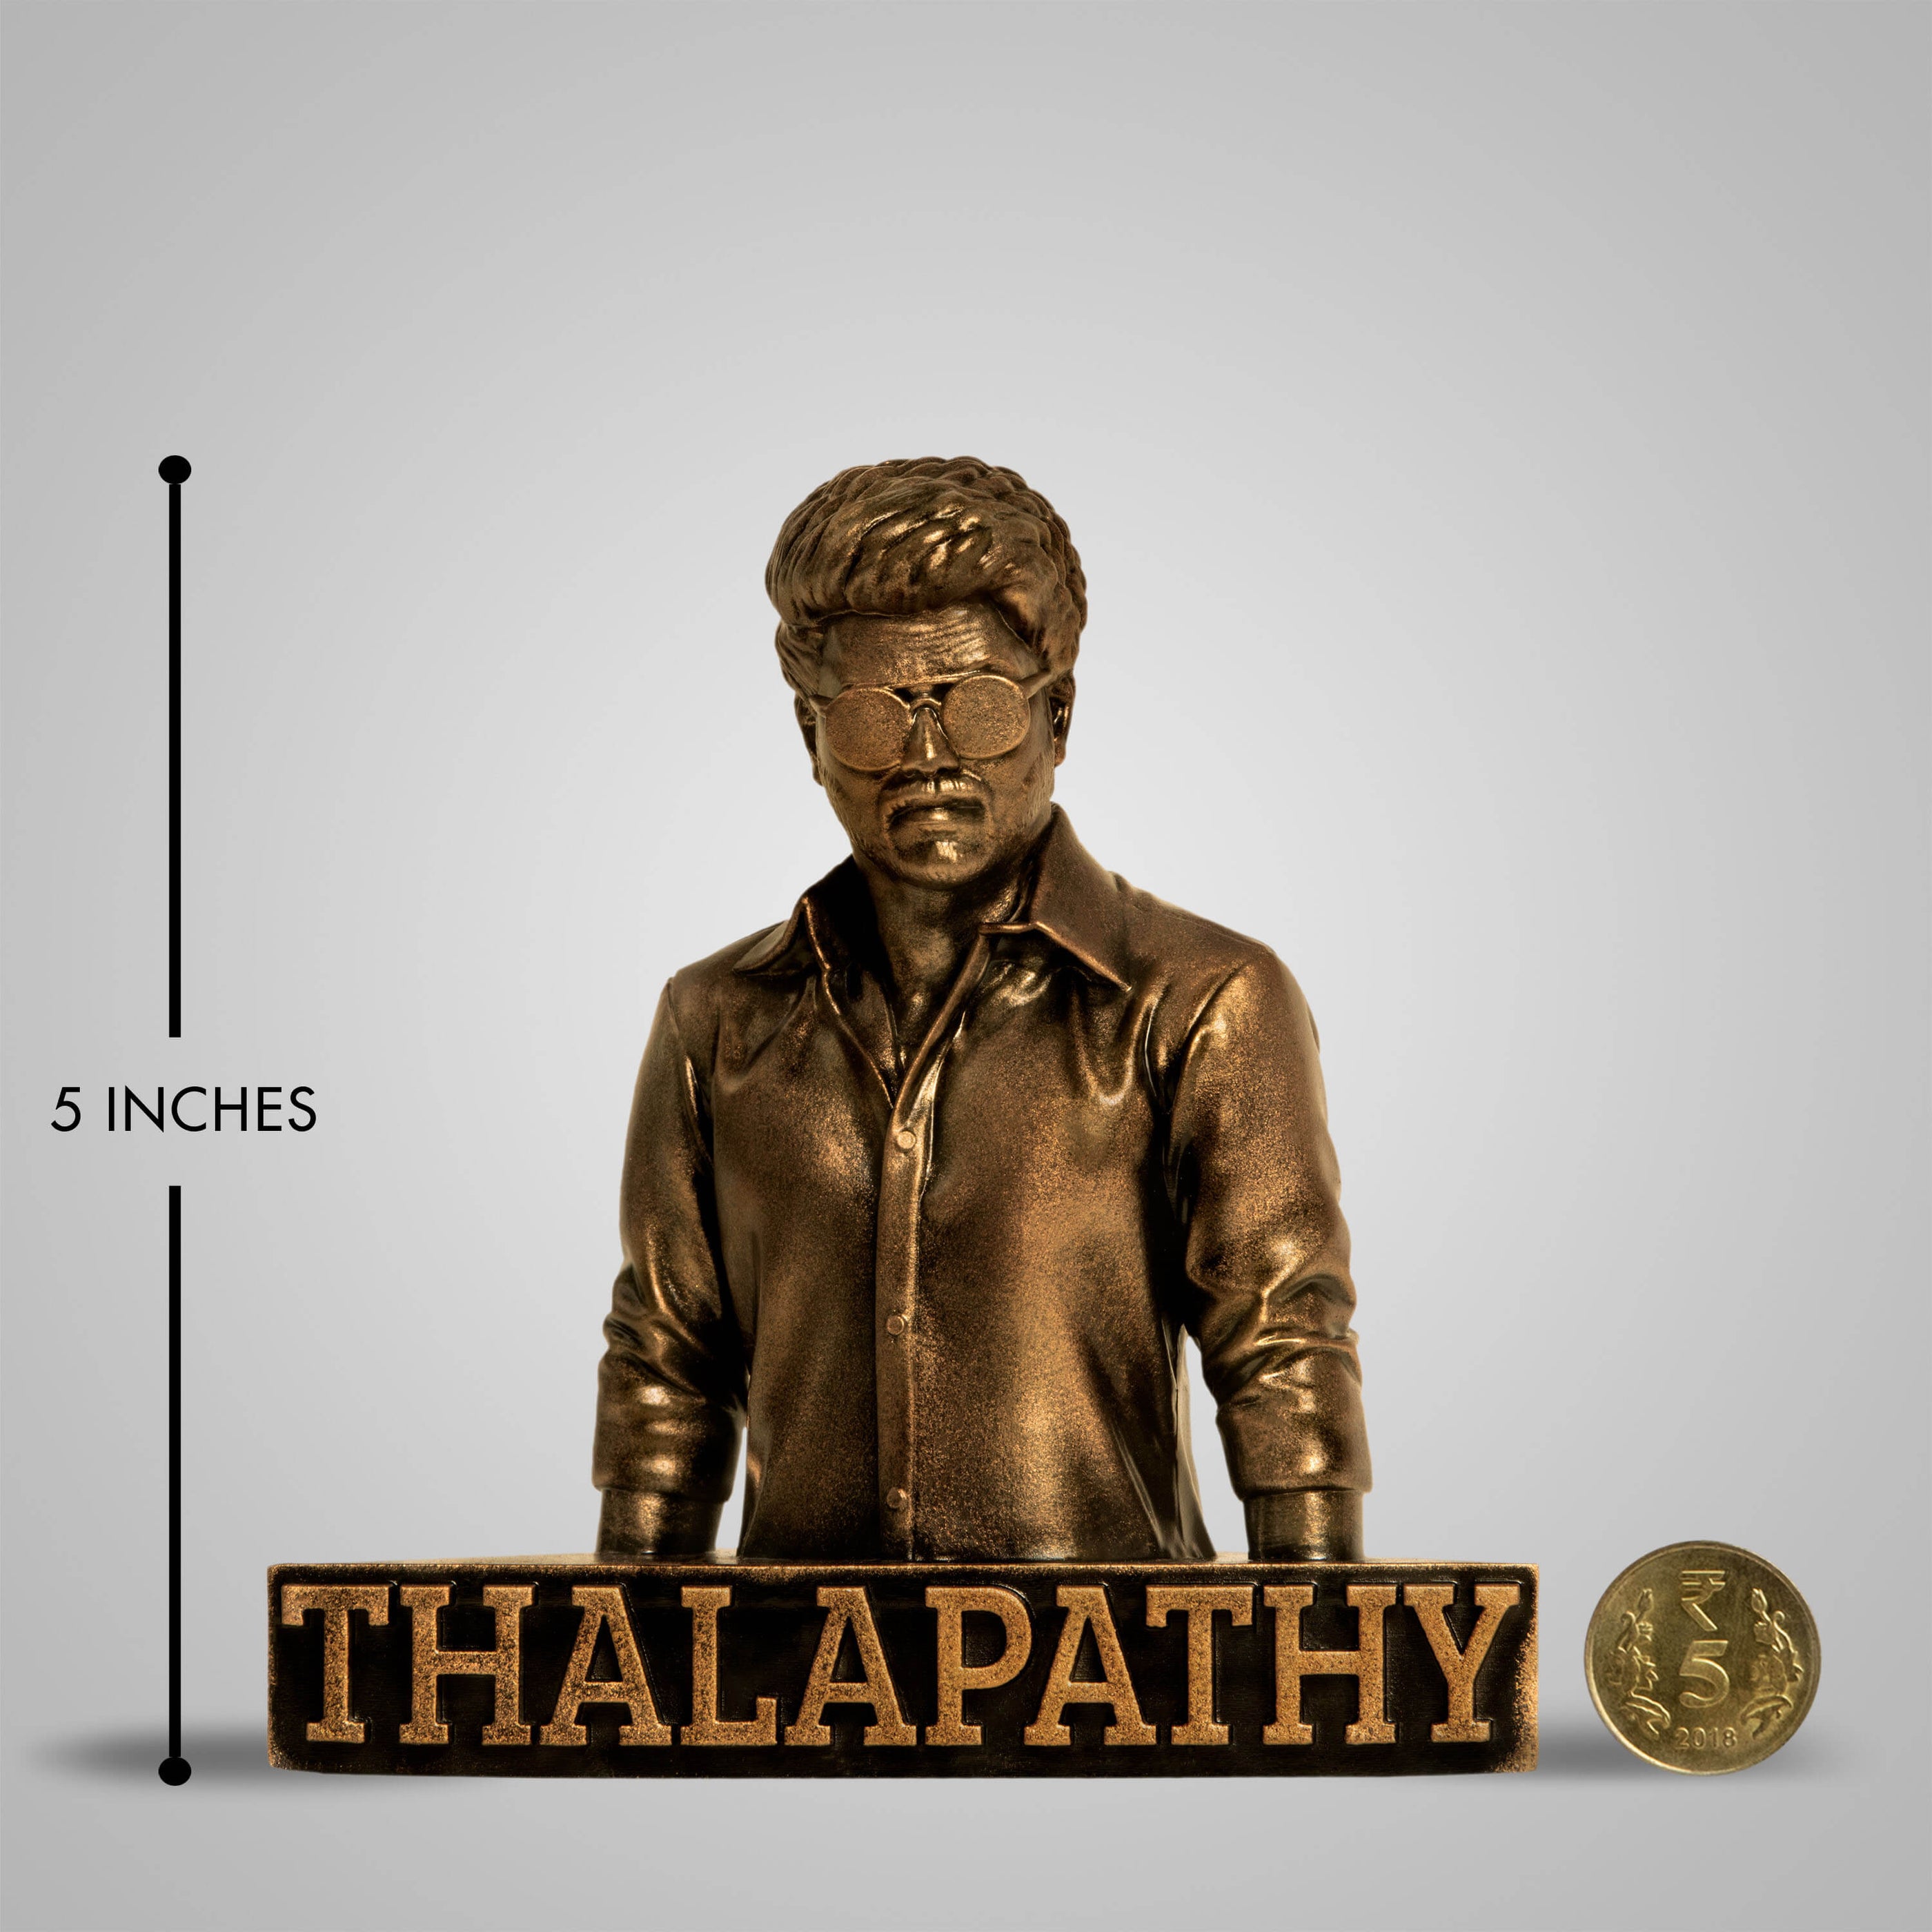 Thalapathy Sculpture - 5"